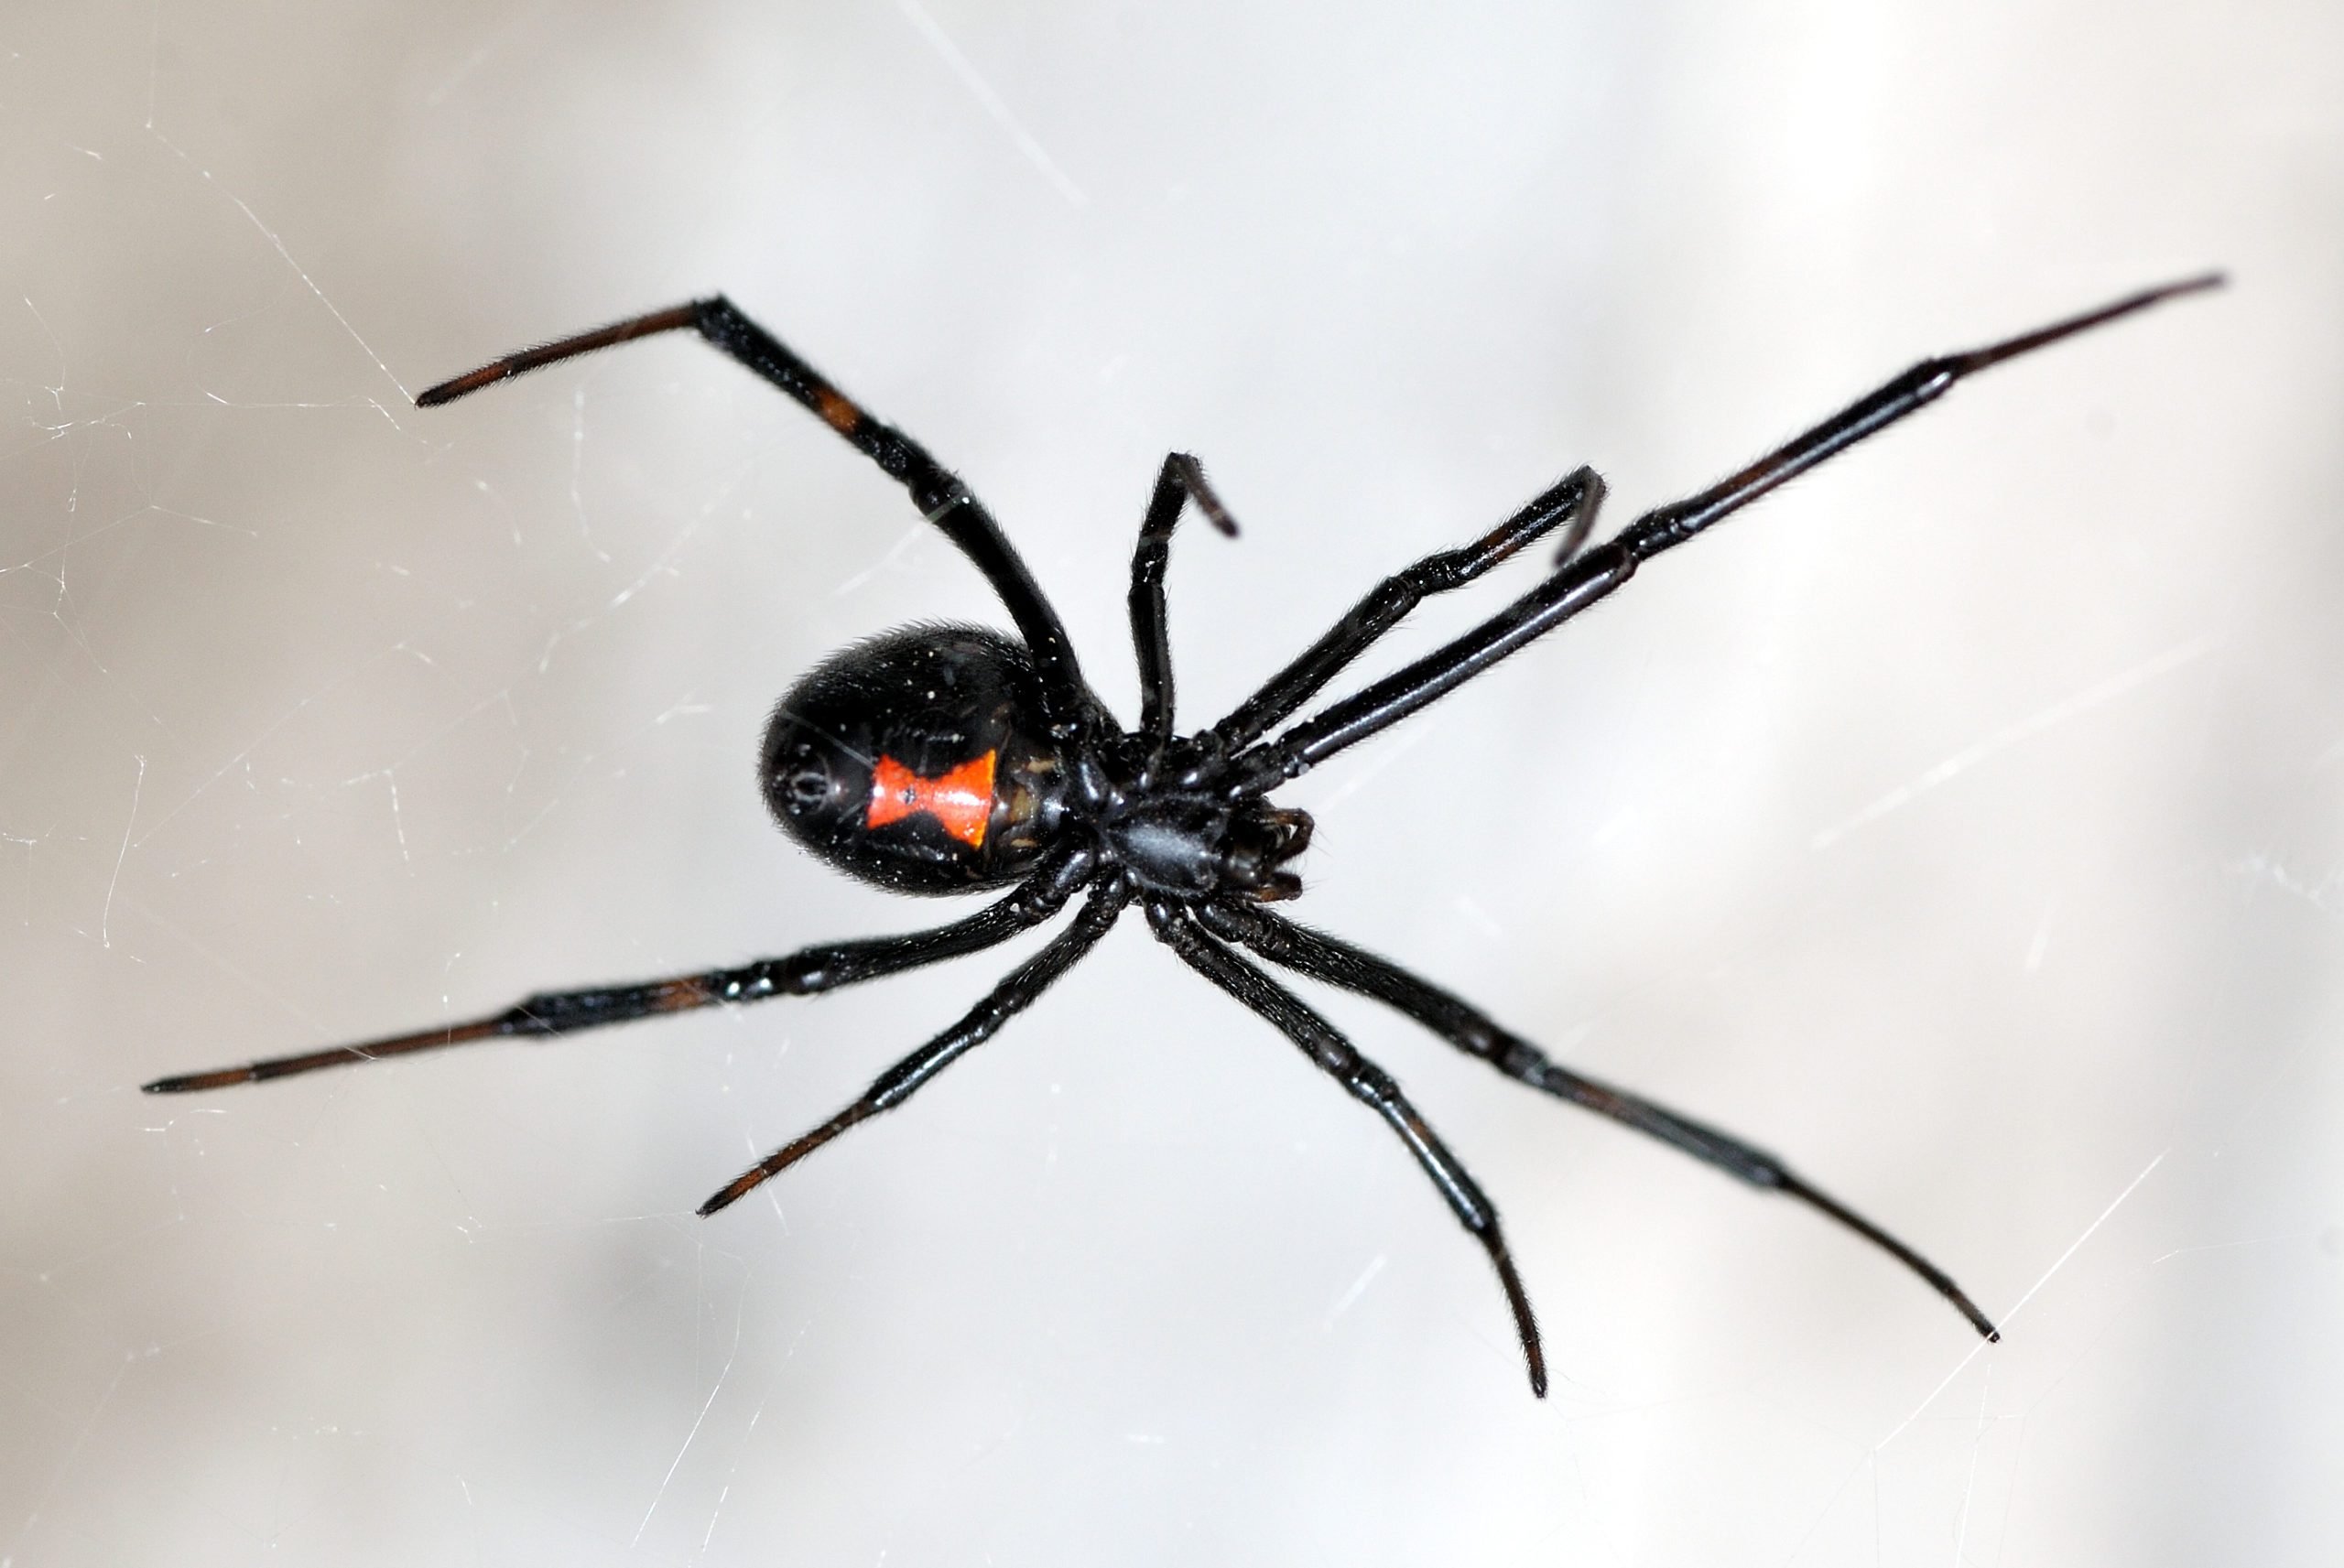 Black Widow Spider Bites: What They Look Like and How to Treat Them